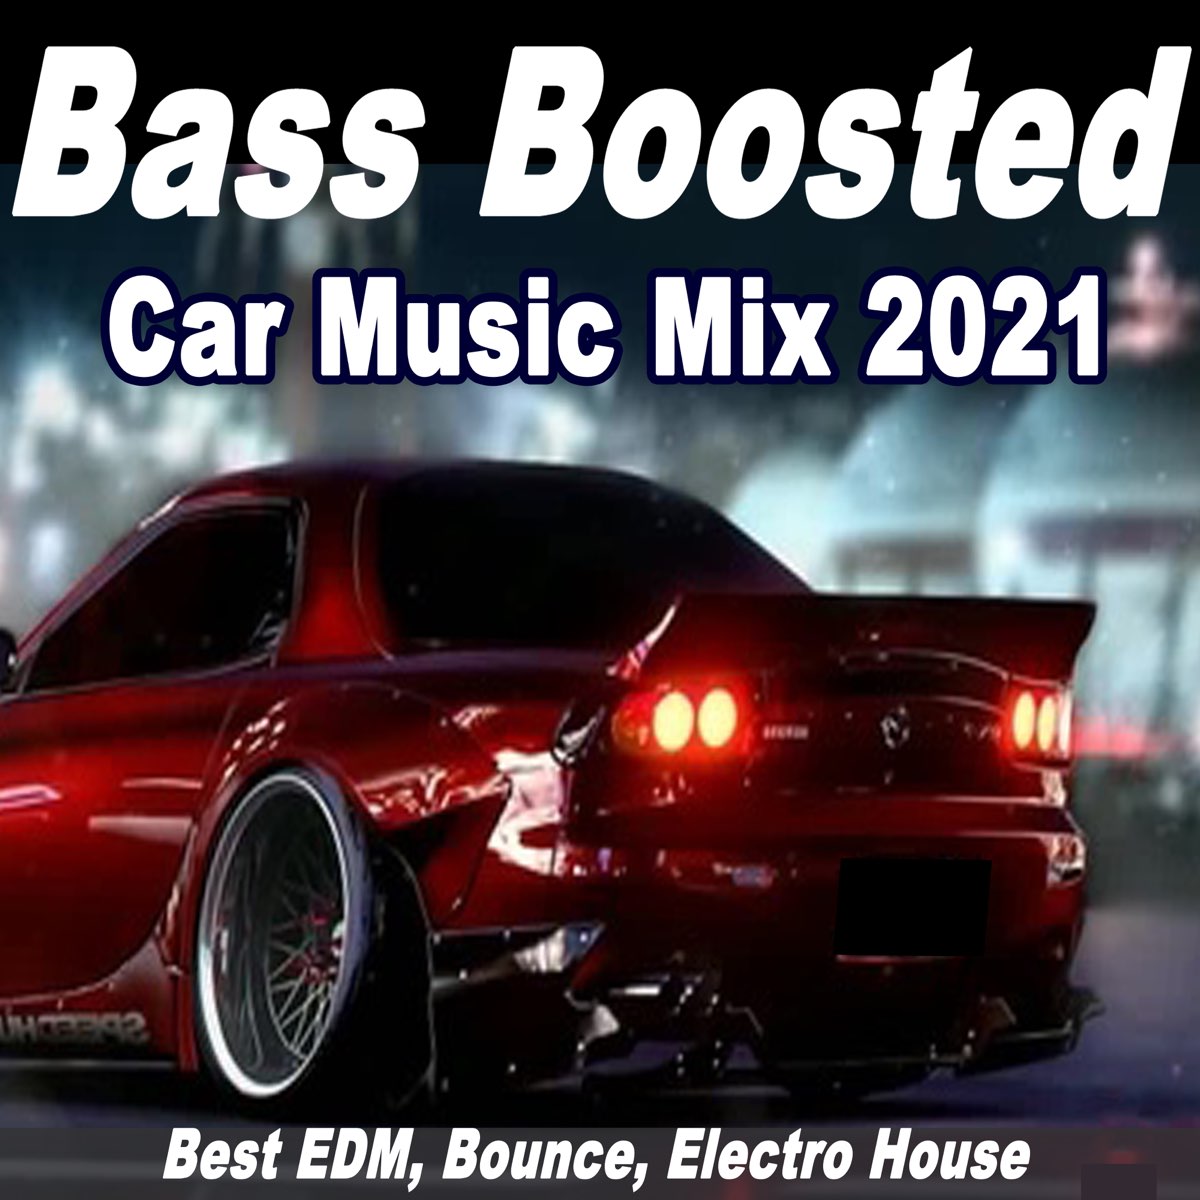 Bass Boosted Car Music Mix 2021 (Best EDM, Bounce, Electro House) by  Various Artists on Apple Music